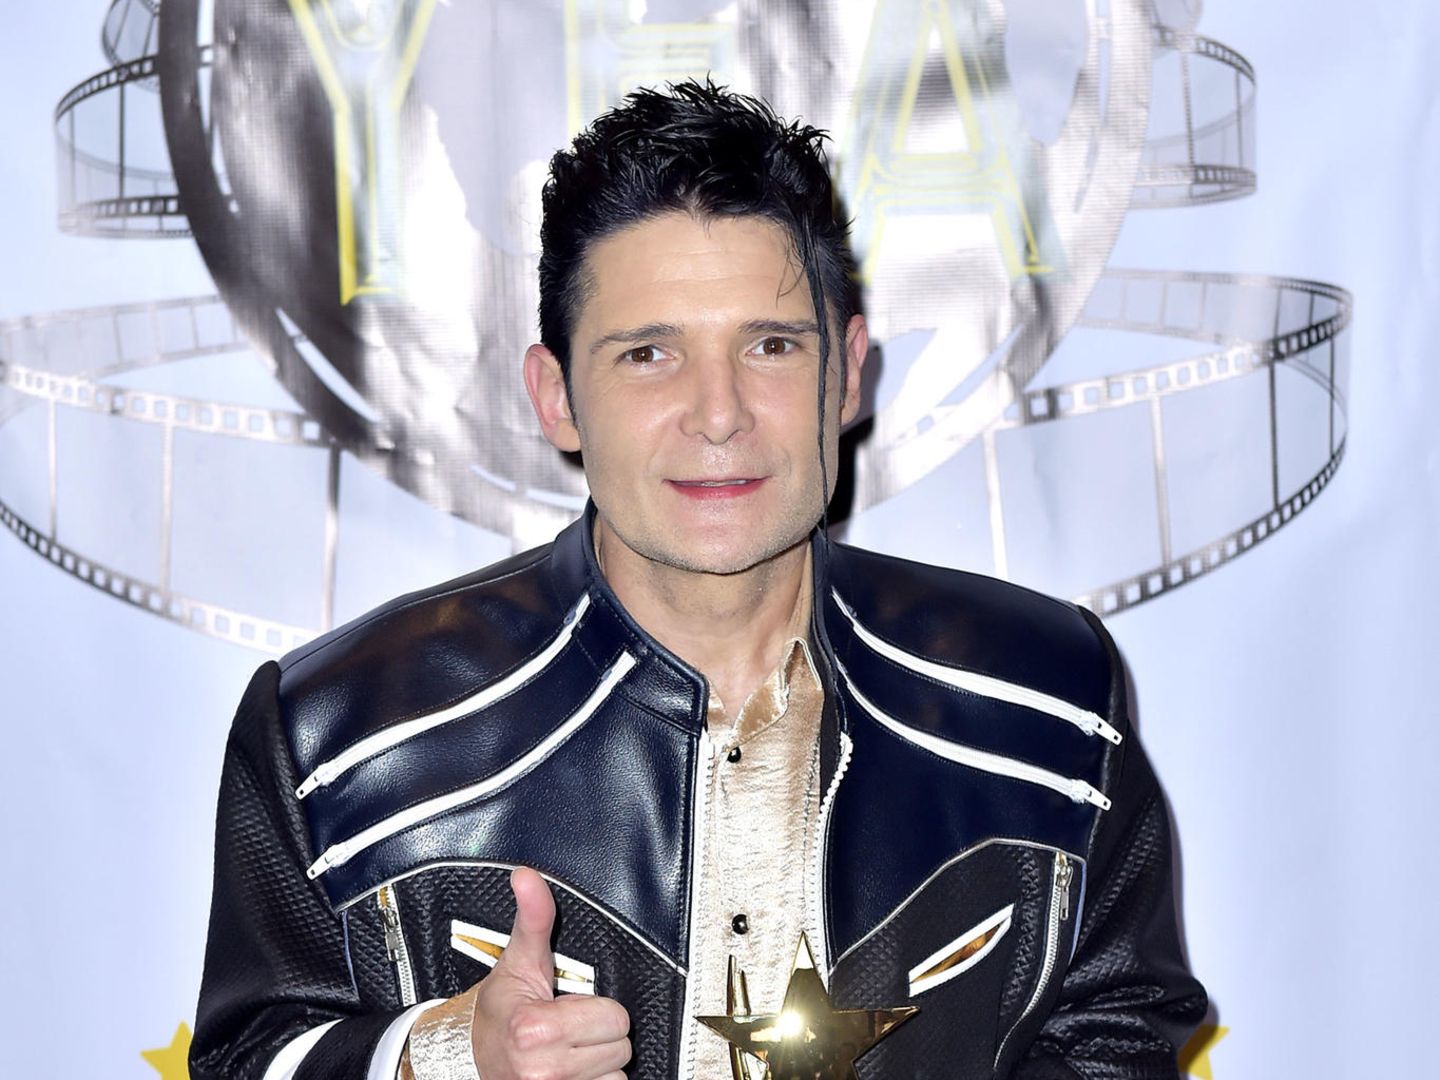 Corey Feldman literally warned about child abuse in their business and was speaking from experience and was shut down. -kitjen